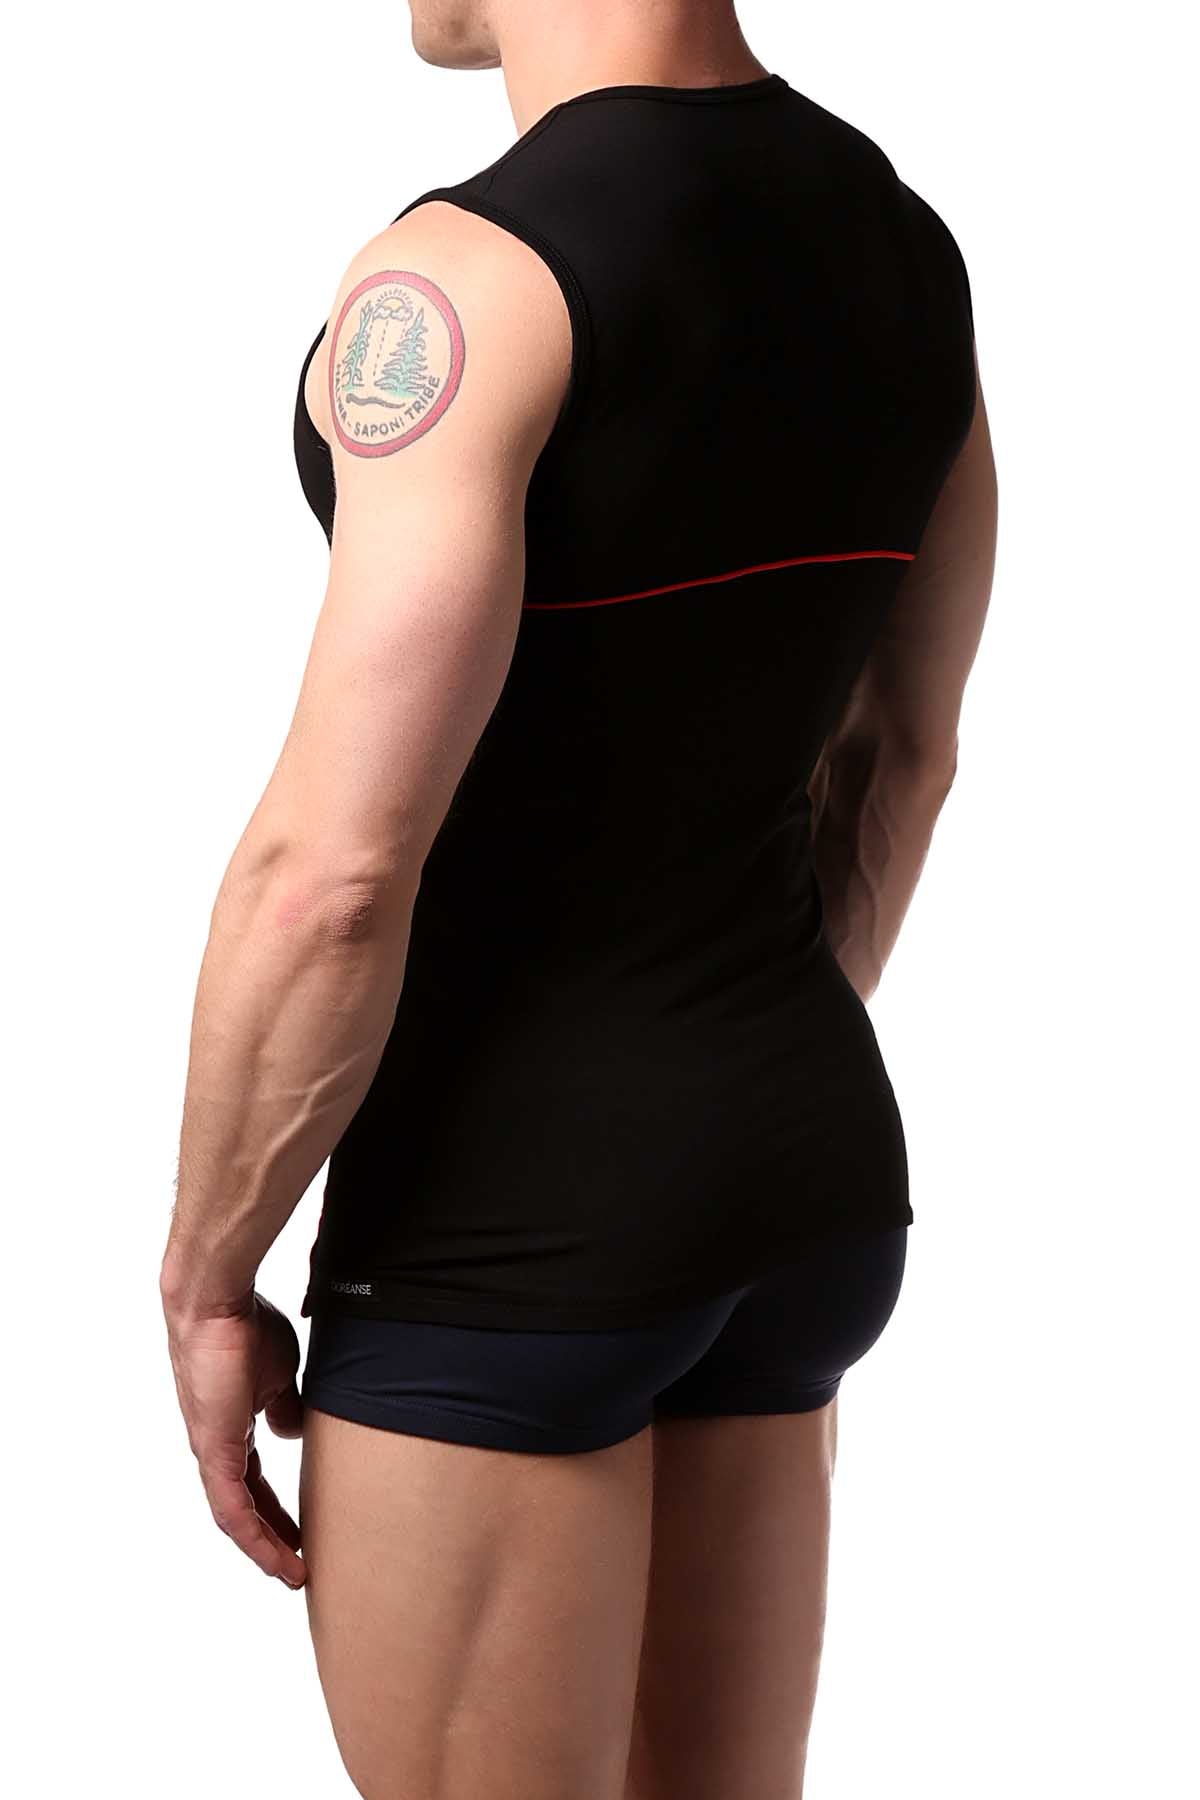 Doreanse Black/Red Athletic Muscle Tee